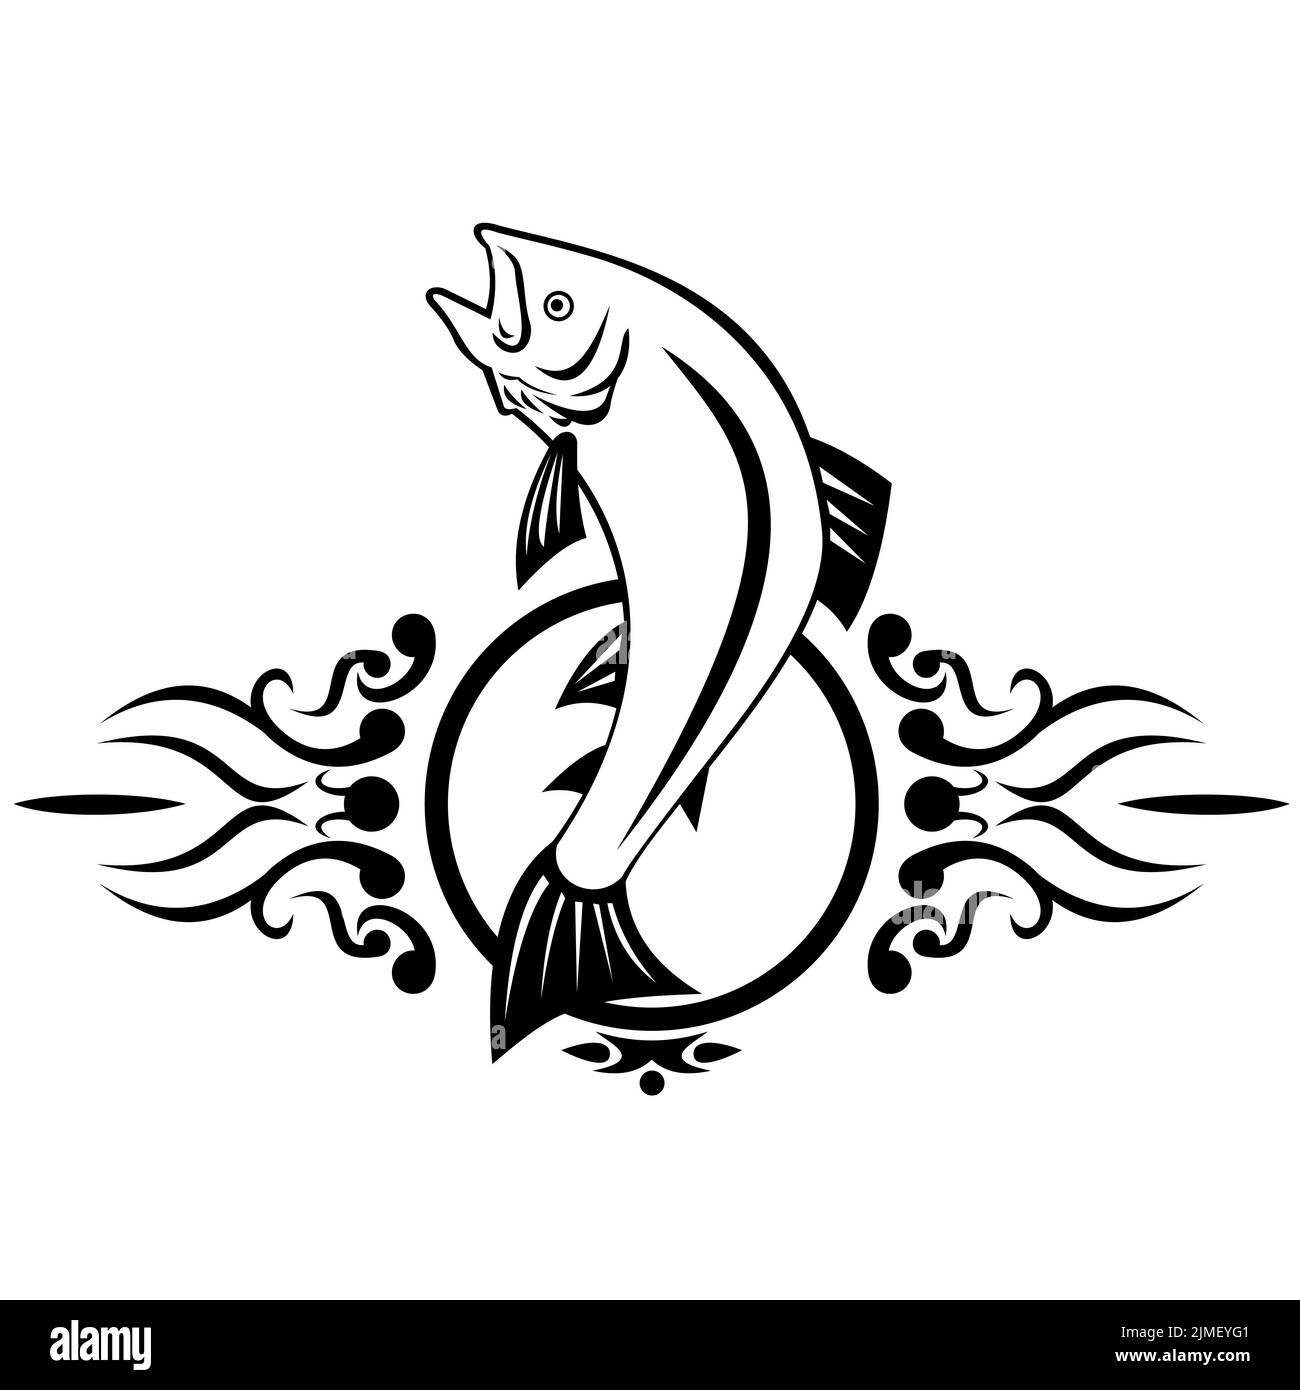 Lake Trout Jumping Up Tribal Tattoo Retro Style Black and White Stock Photo